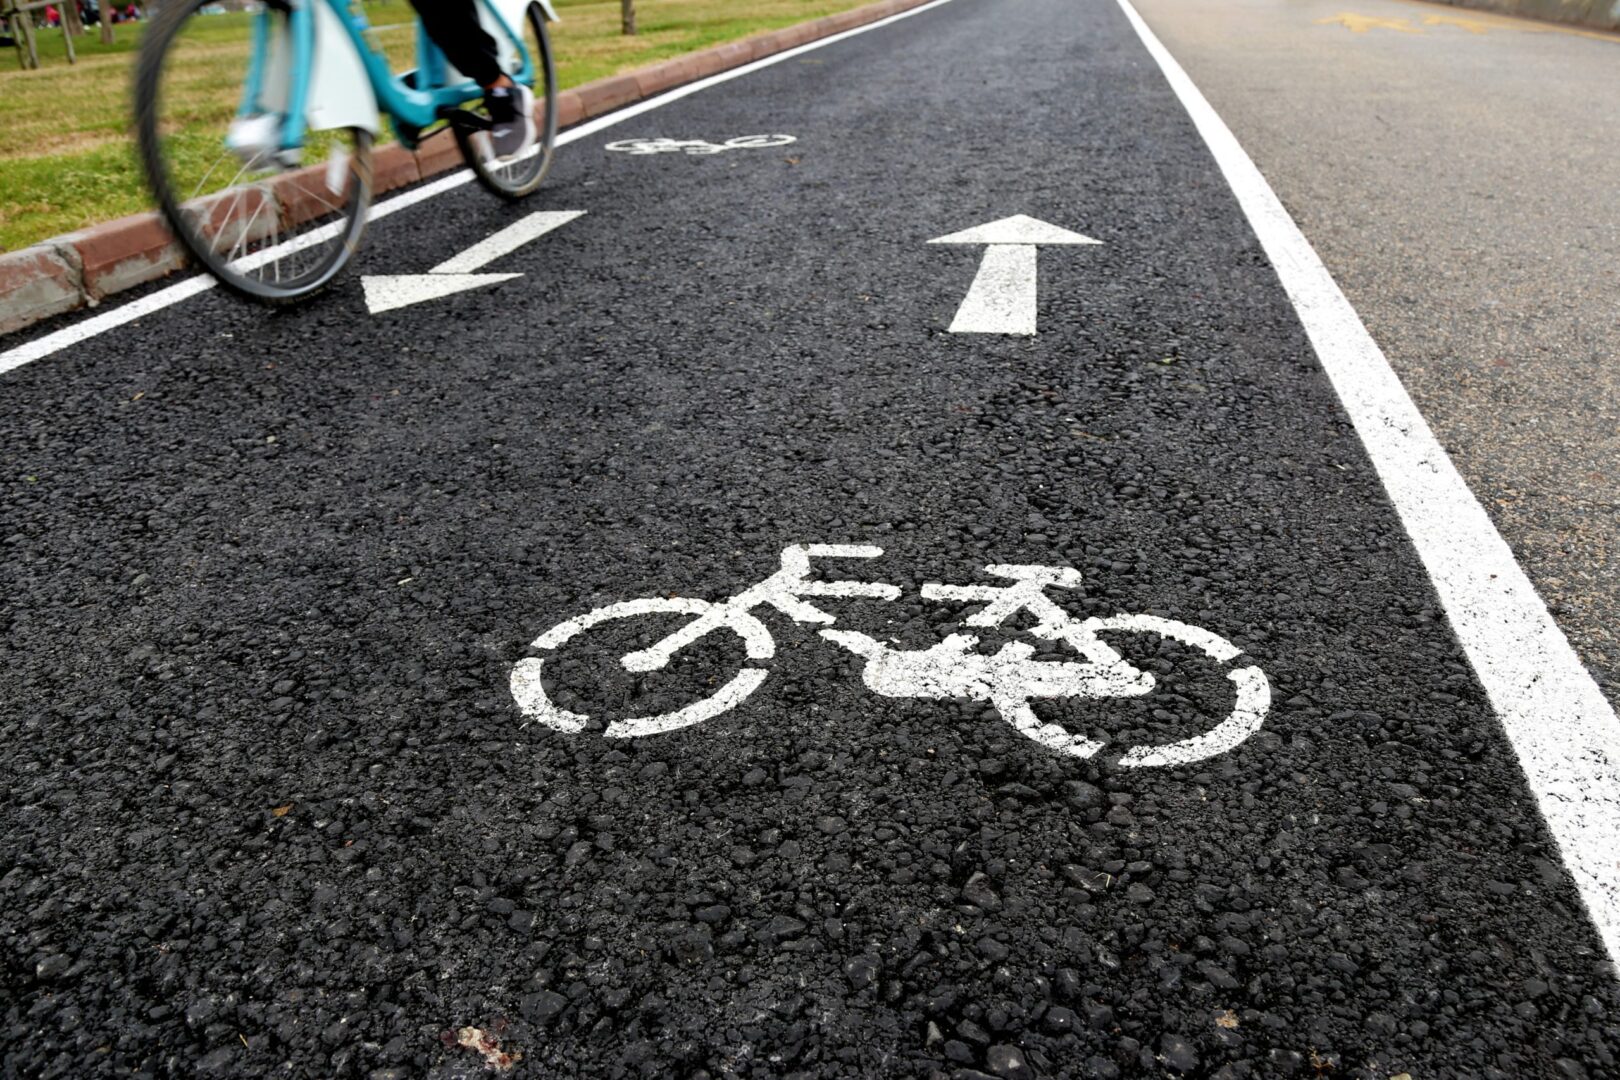 Greater priority given to cyclists and walkers with new changes to Highway Code